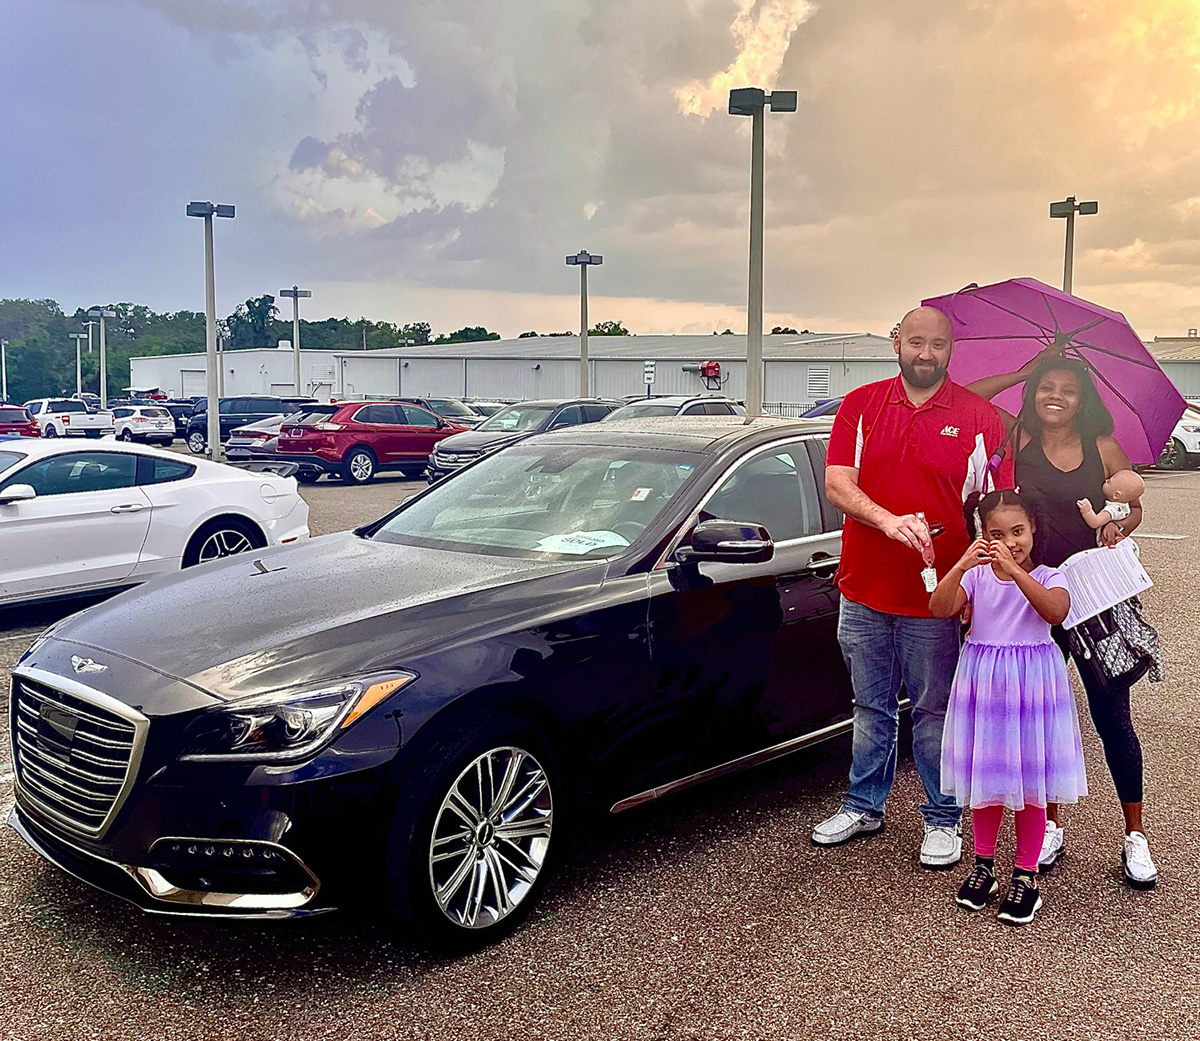 When the Johns family was looking for a great #LuxurySedan, it was the #GenesisG80 at #LakelandAutomall that had everything they were looking for and salesperson #SergeyKavalerskiy made buying #Fast, #Fun & #Easy - #LookingGood & #ThankYou for choosing us - we're here for you!